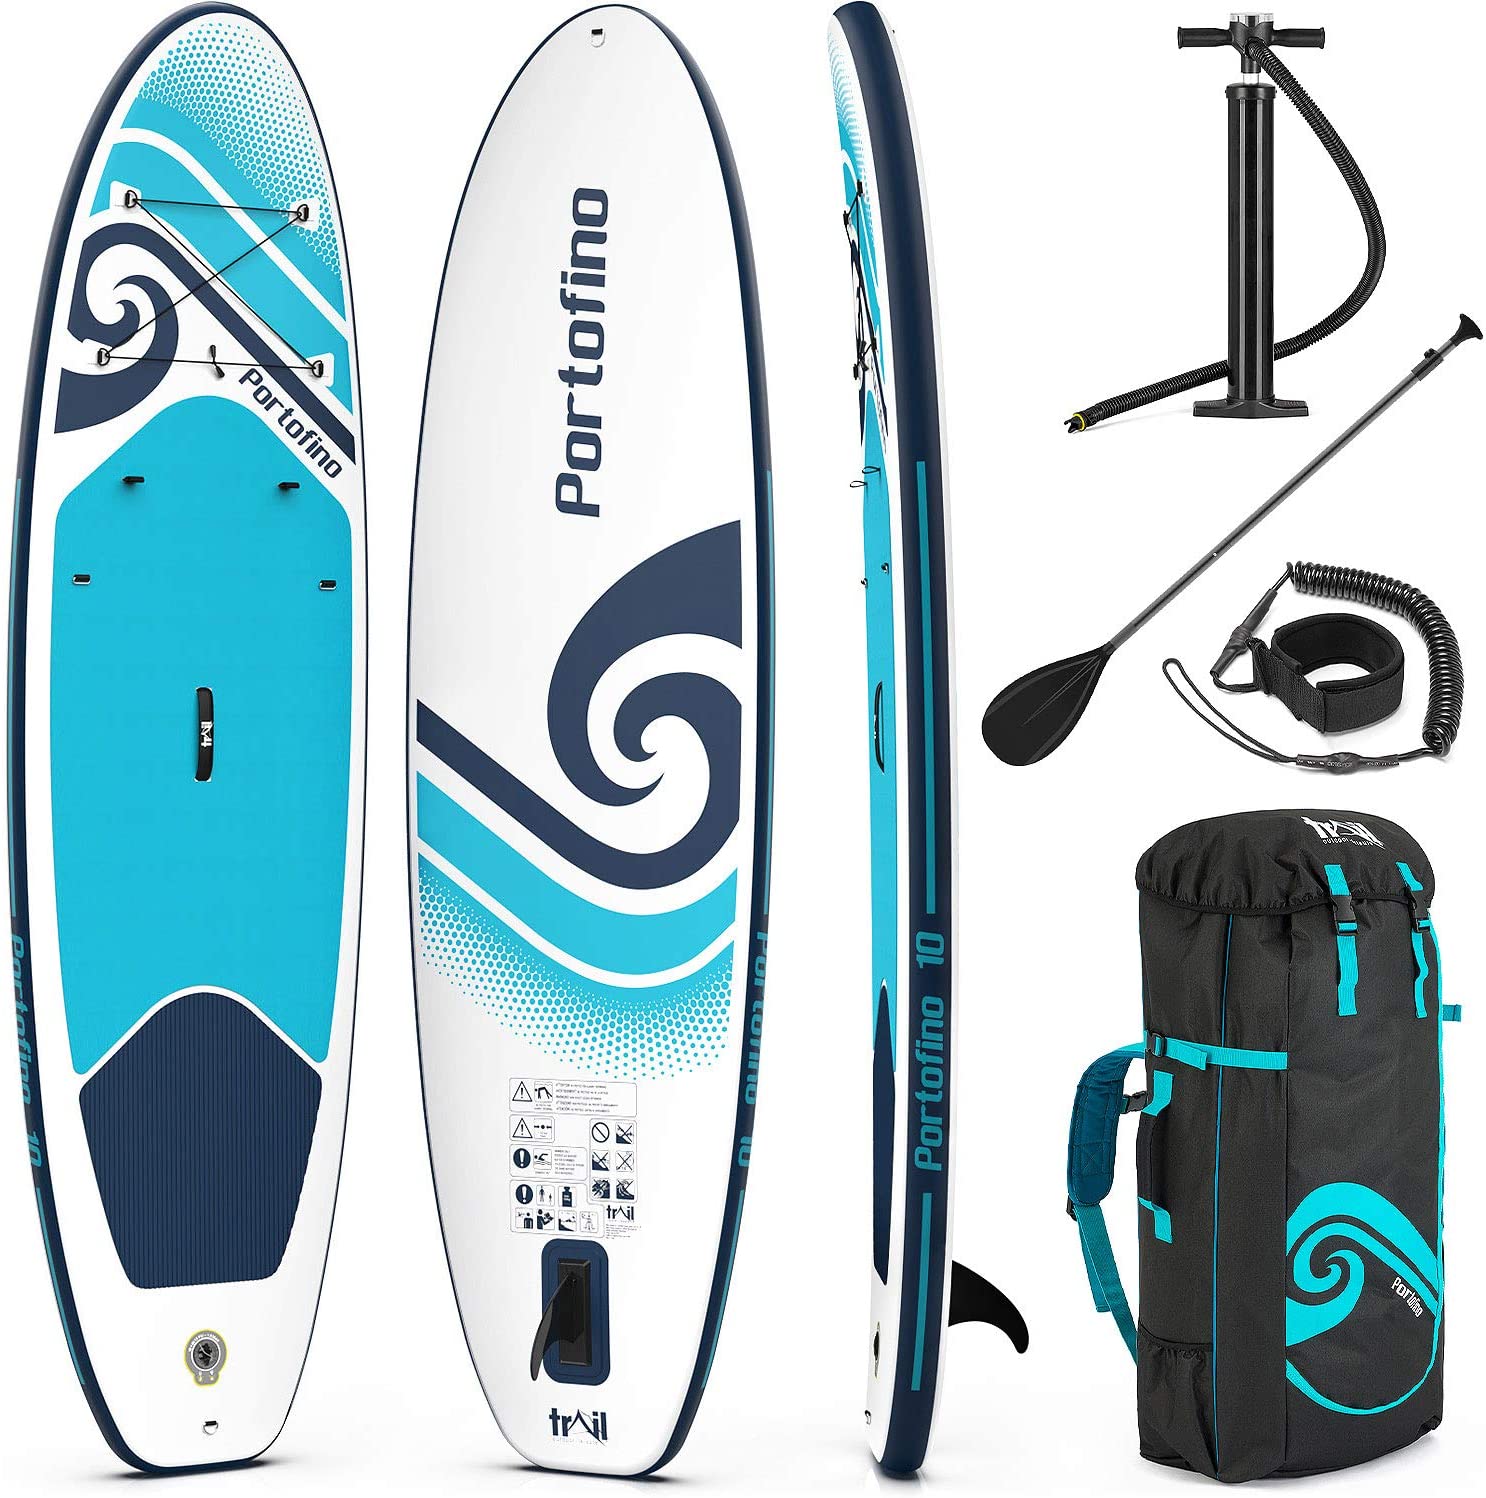 Portofino budget inflatable stand up paddle board